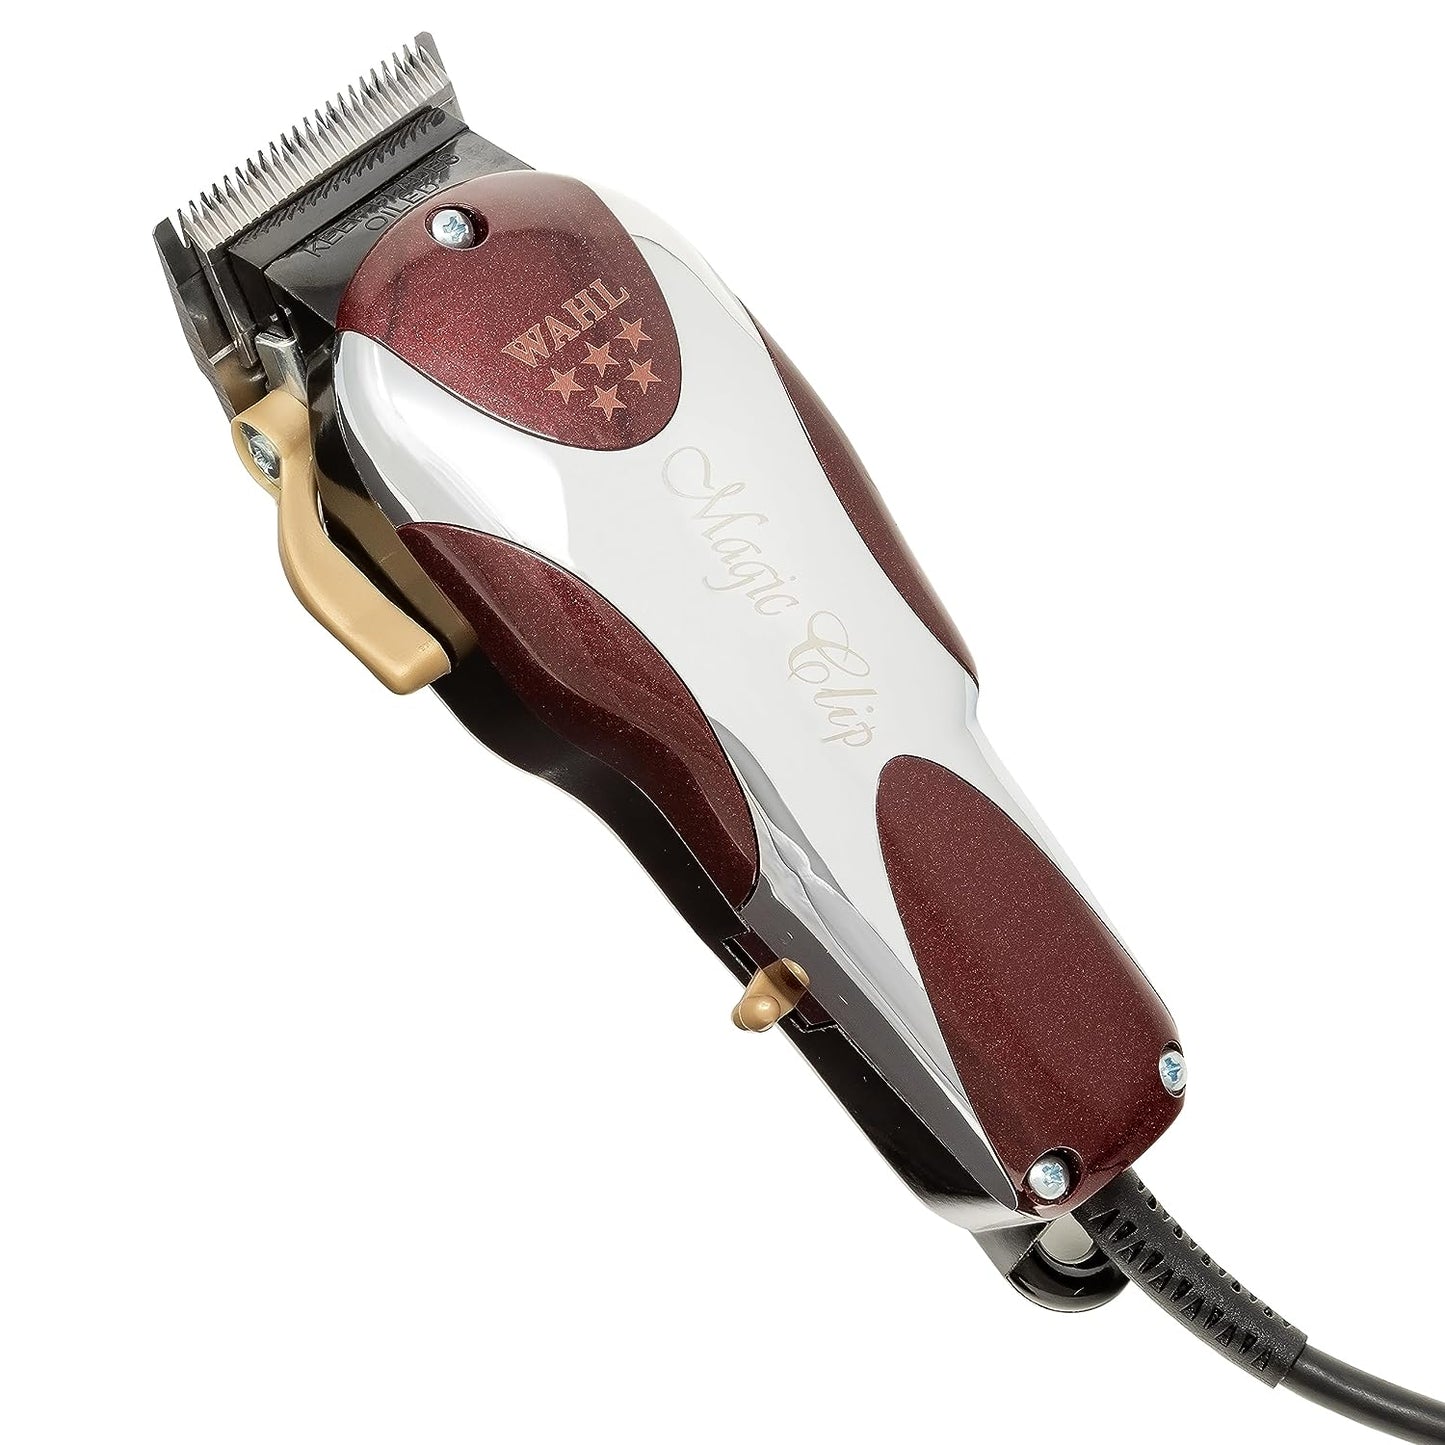 Wahl Professional 5-Star Magic Clip #845 – Great for Barbers and Stylists – Precision Fade Clipper with Zero Overlap Adjustable Blades, V9000 Cool-Running Motor, Variable Taper and Texture Settings, Chrome, 1 Count